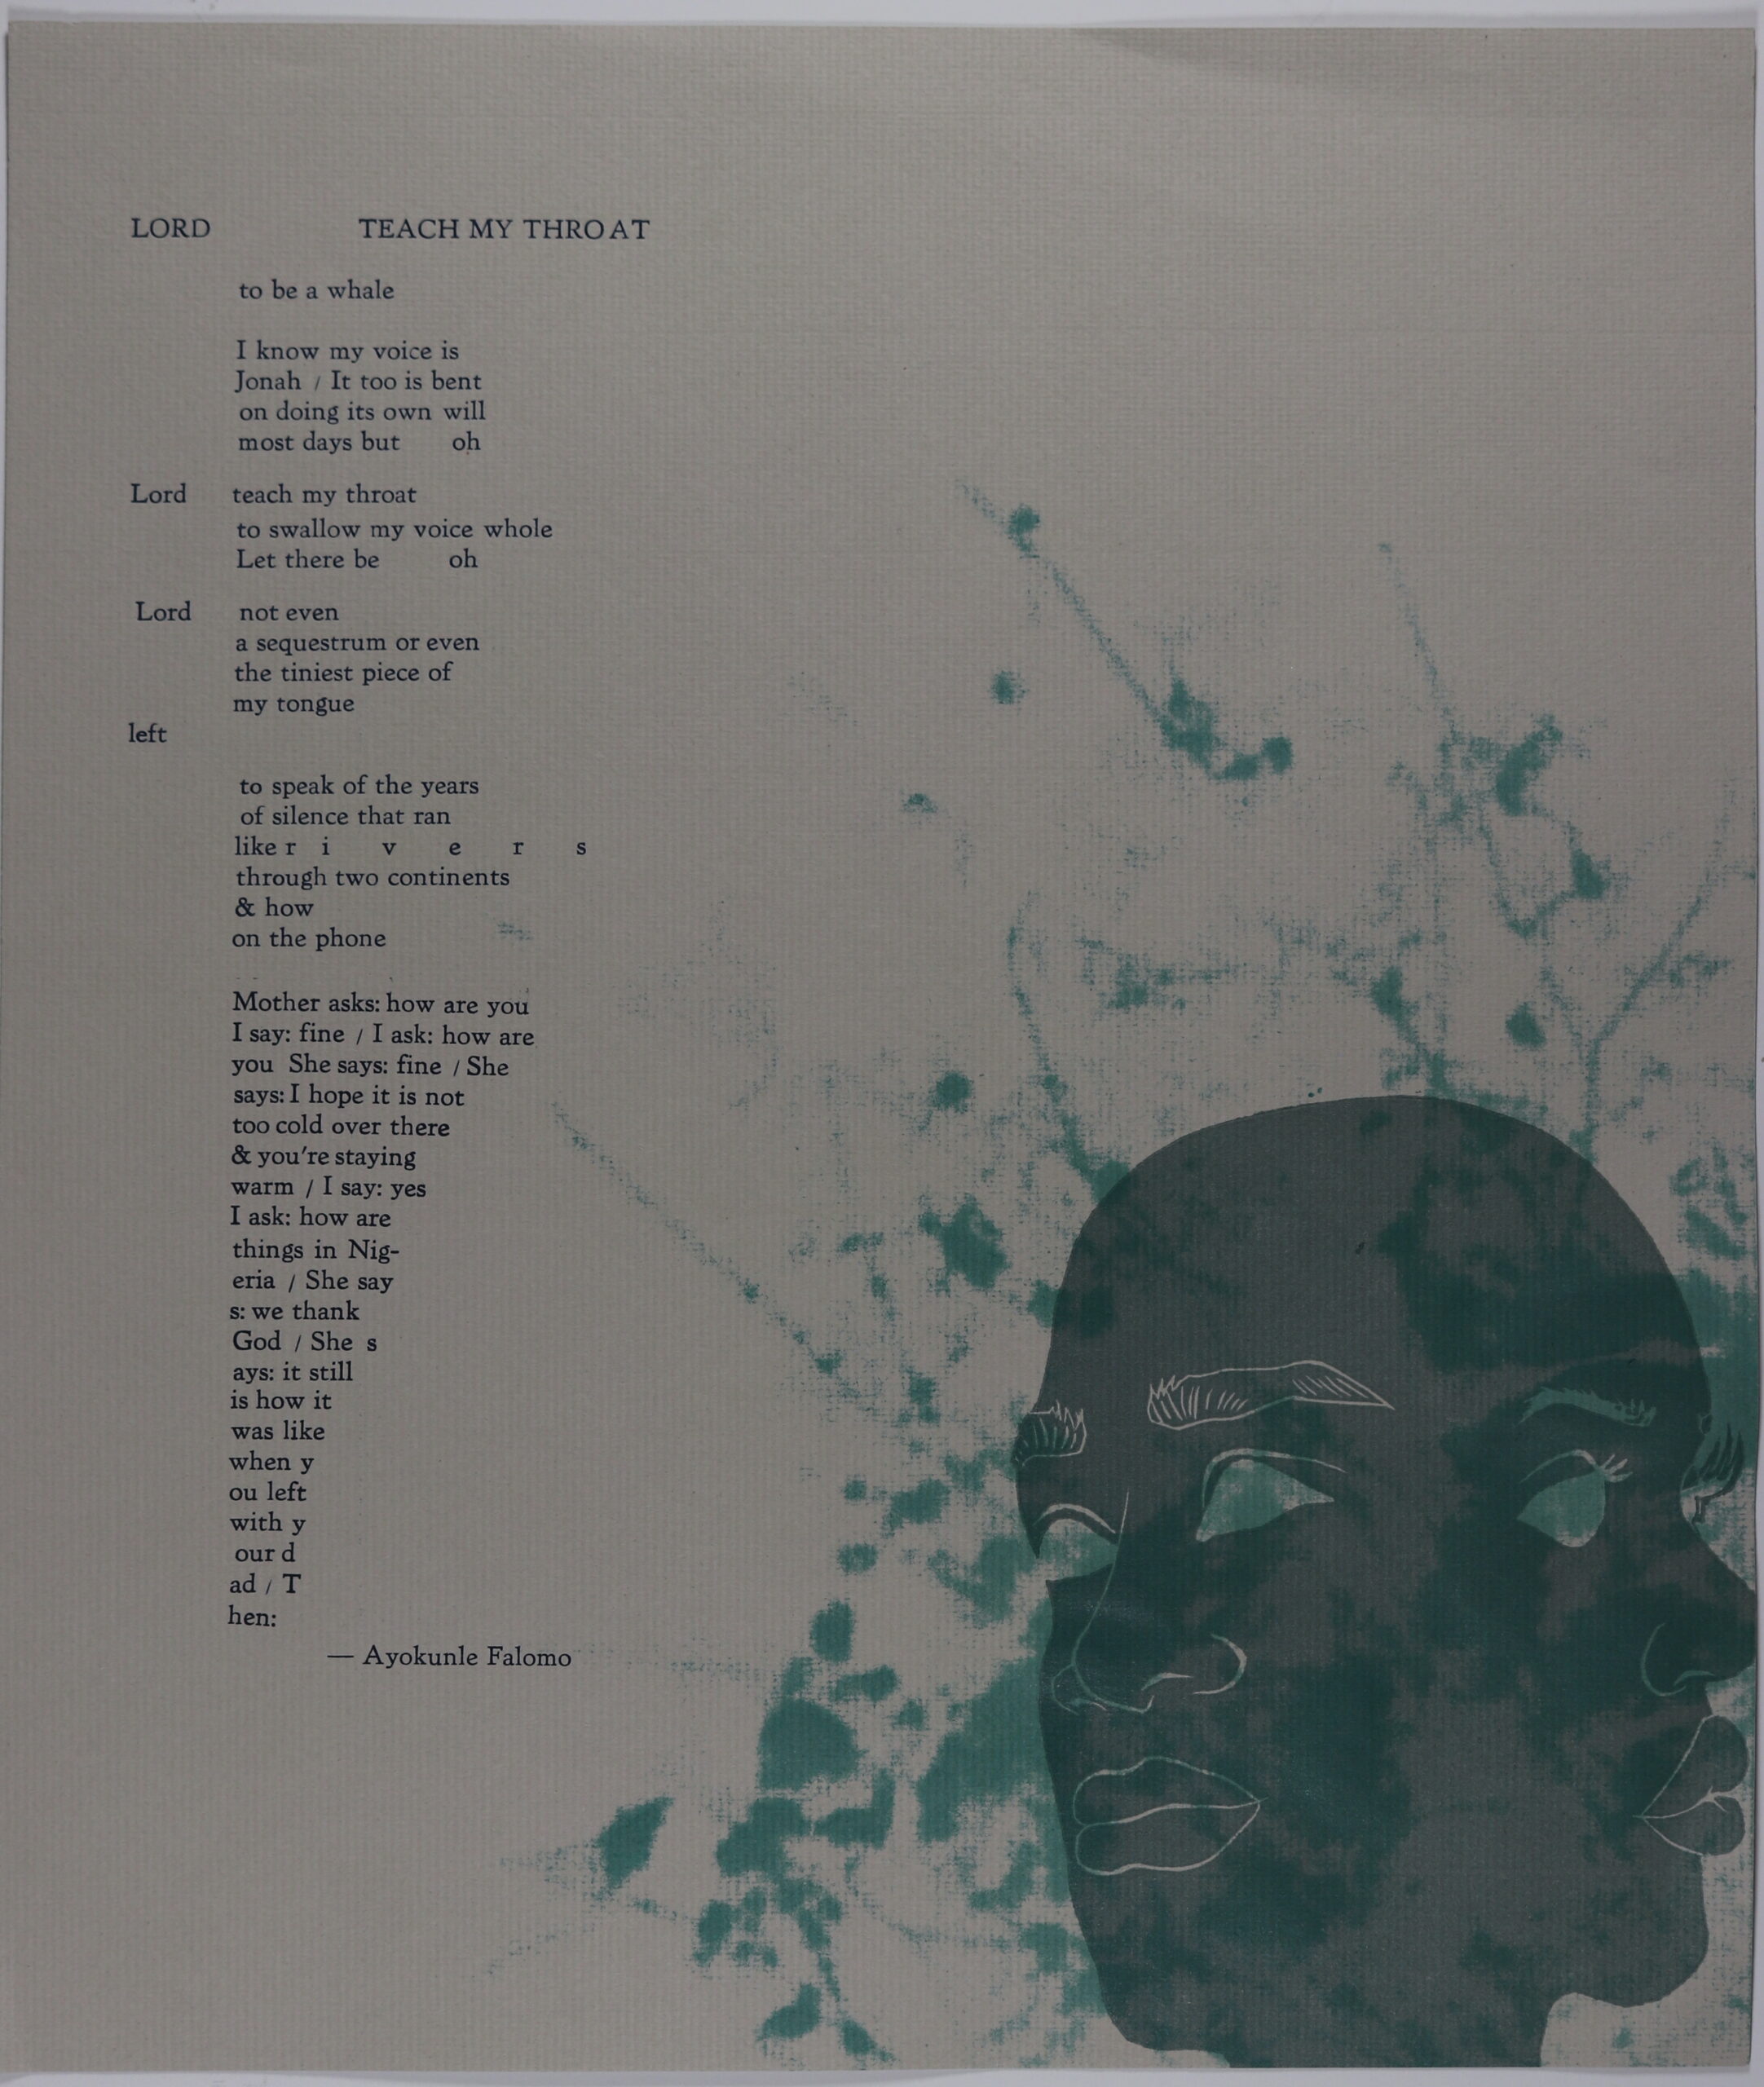 Broadside consists of a gray background with an image of a human head towards the bottom right corner of the paper. The human head is double faced, both faces colored in a dark green and facing each their own way on the paper. Facial features are large and prominent. Around the faces are splashes of the same color, almost like branches. The title and text are in the upper corner of the left side of the paper. The text is colored in black and formatted into long paragraphs that almost reach the end of the broadside itself. The word “Lord” stands out from some of the paragraphs on the furthest left of the text.